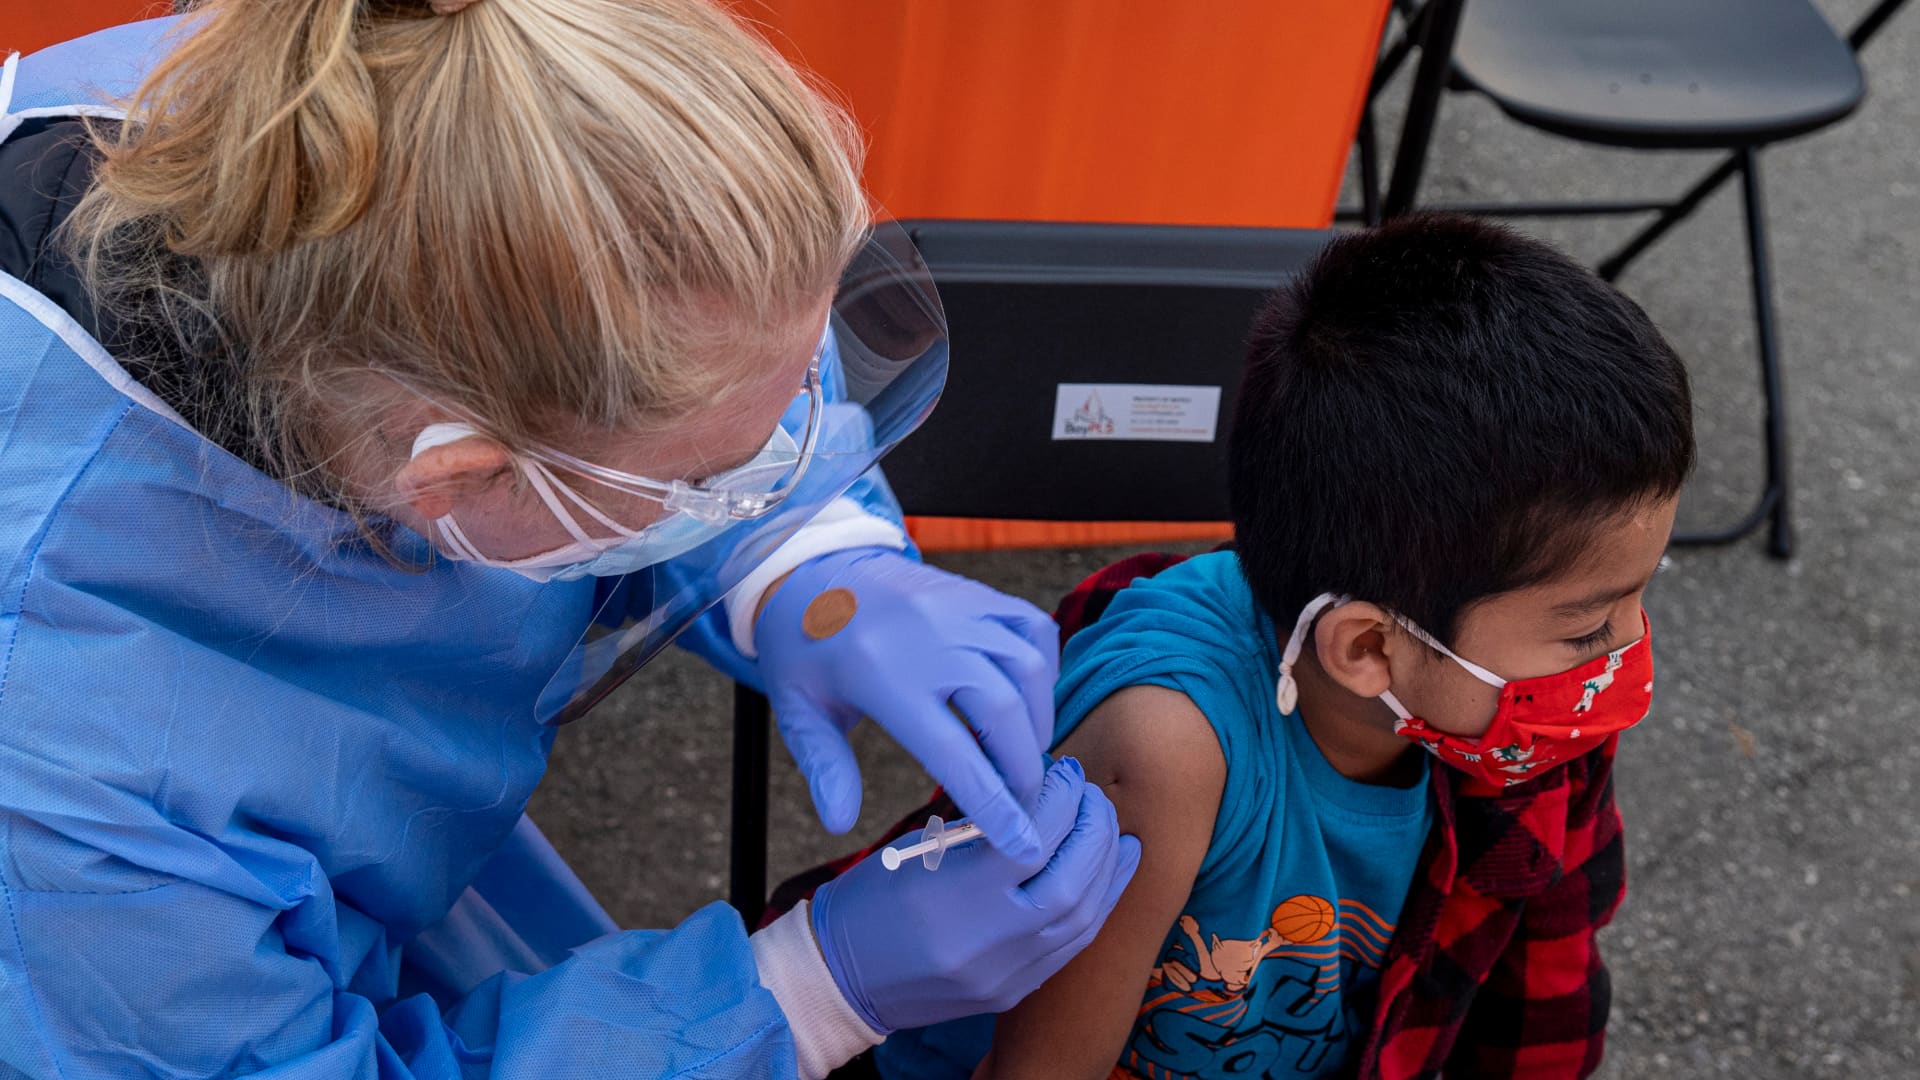 A healthcare worker administers a Pfizer-BioNTech Covid-19 vaccine to a child at vaccination site in San Francisco, California, U.S., on Monday, Jan. 10, 2022.